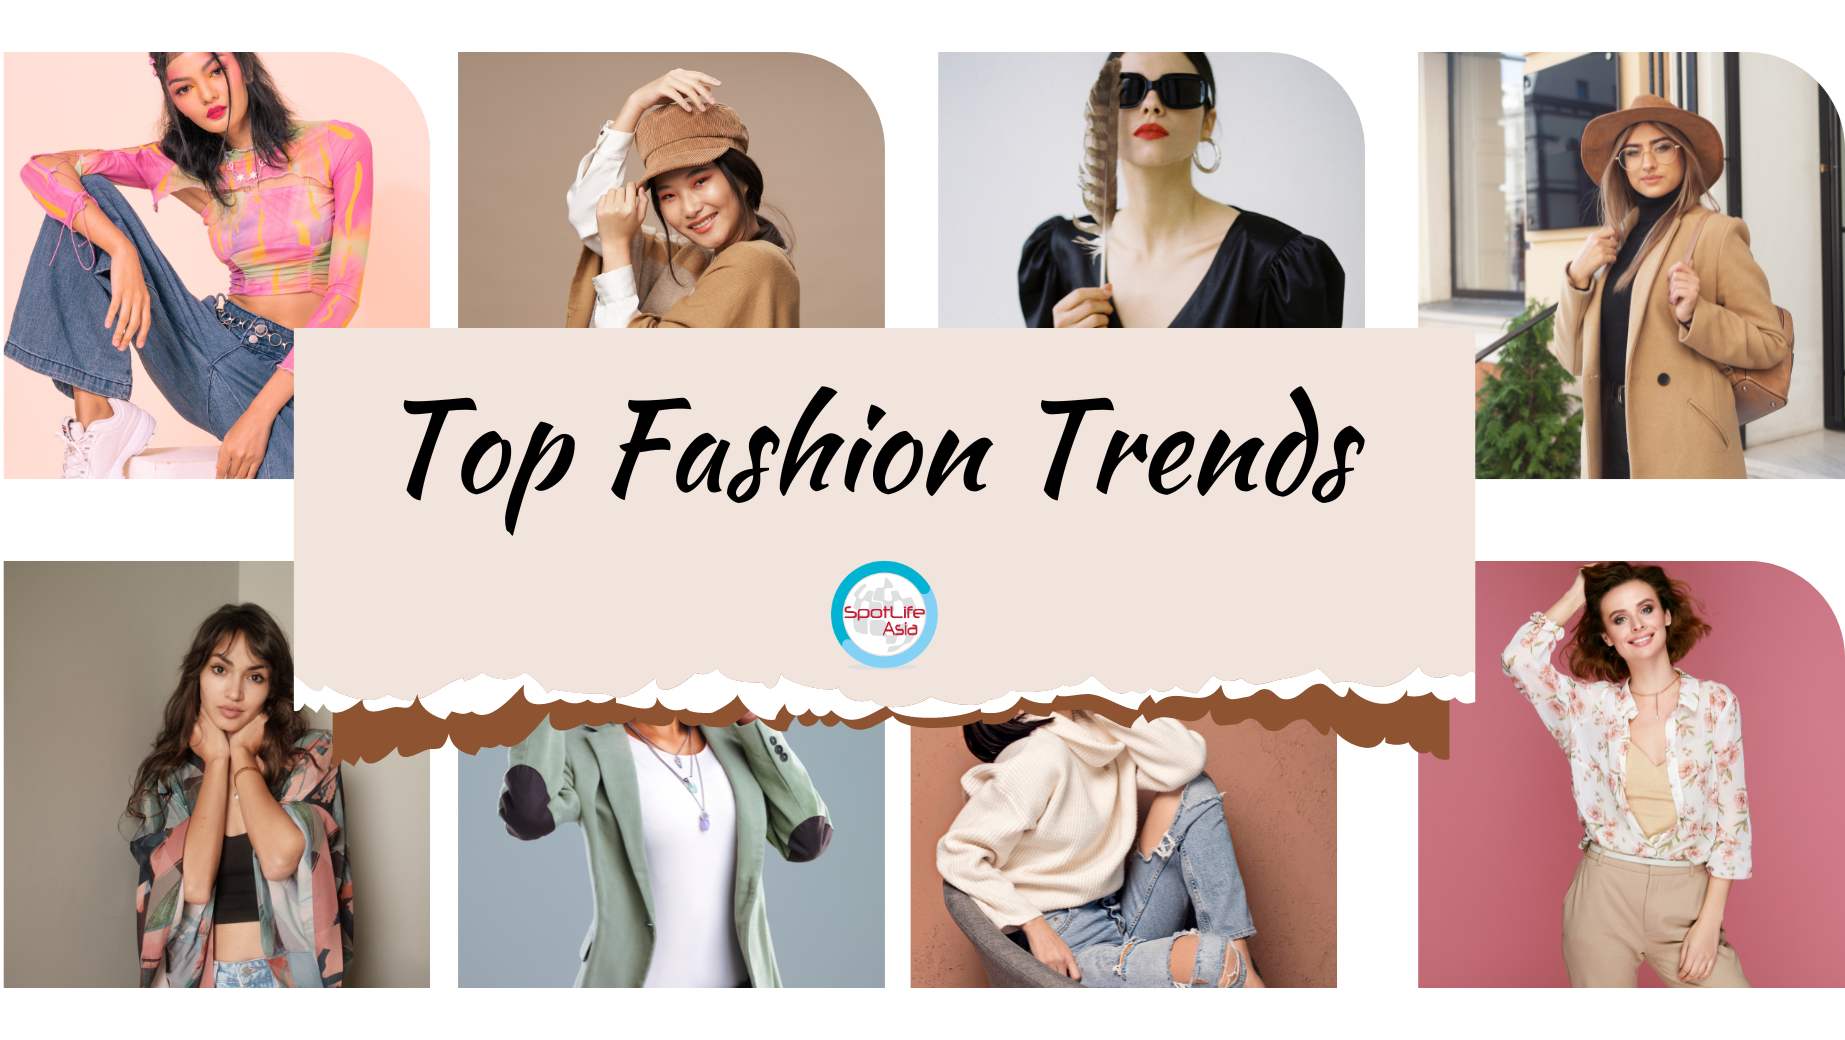 Spotlife Asia » What are the top fashion trends to follow?